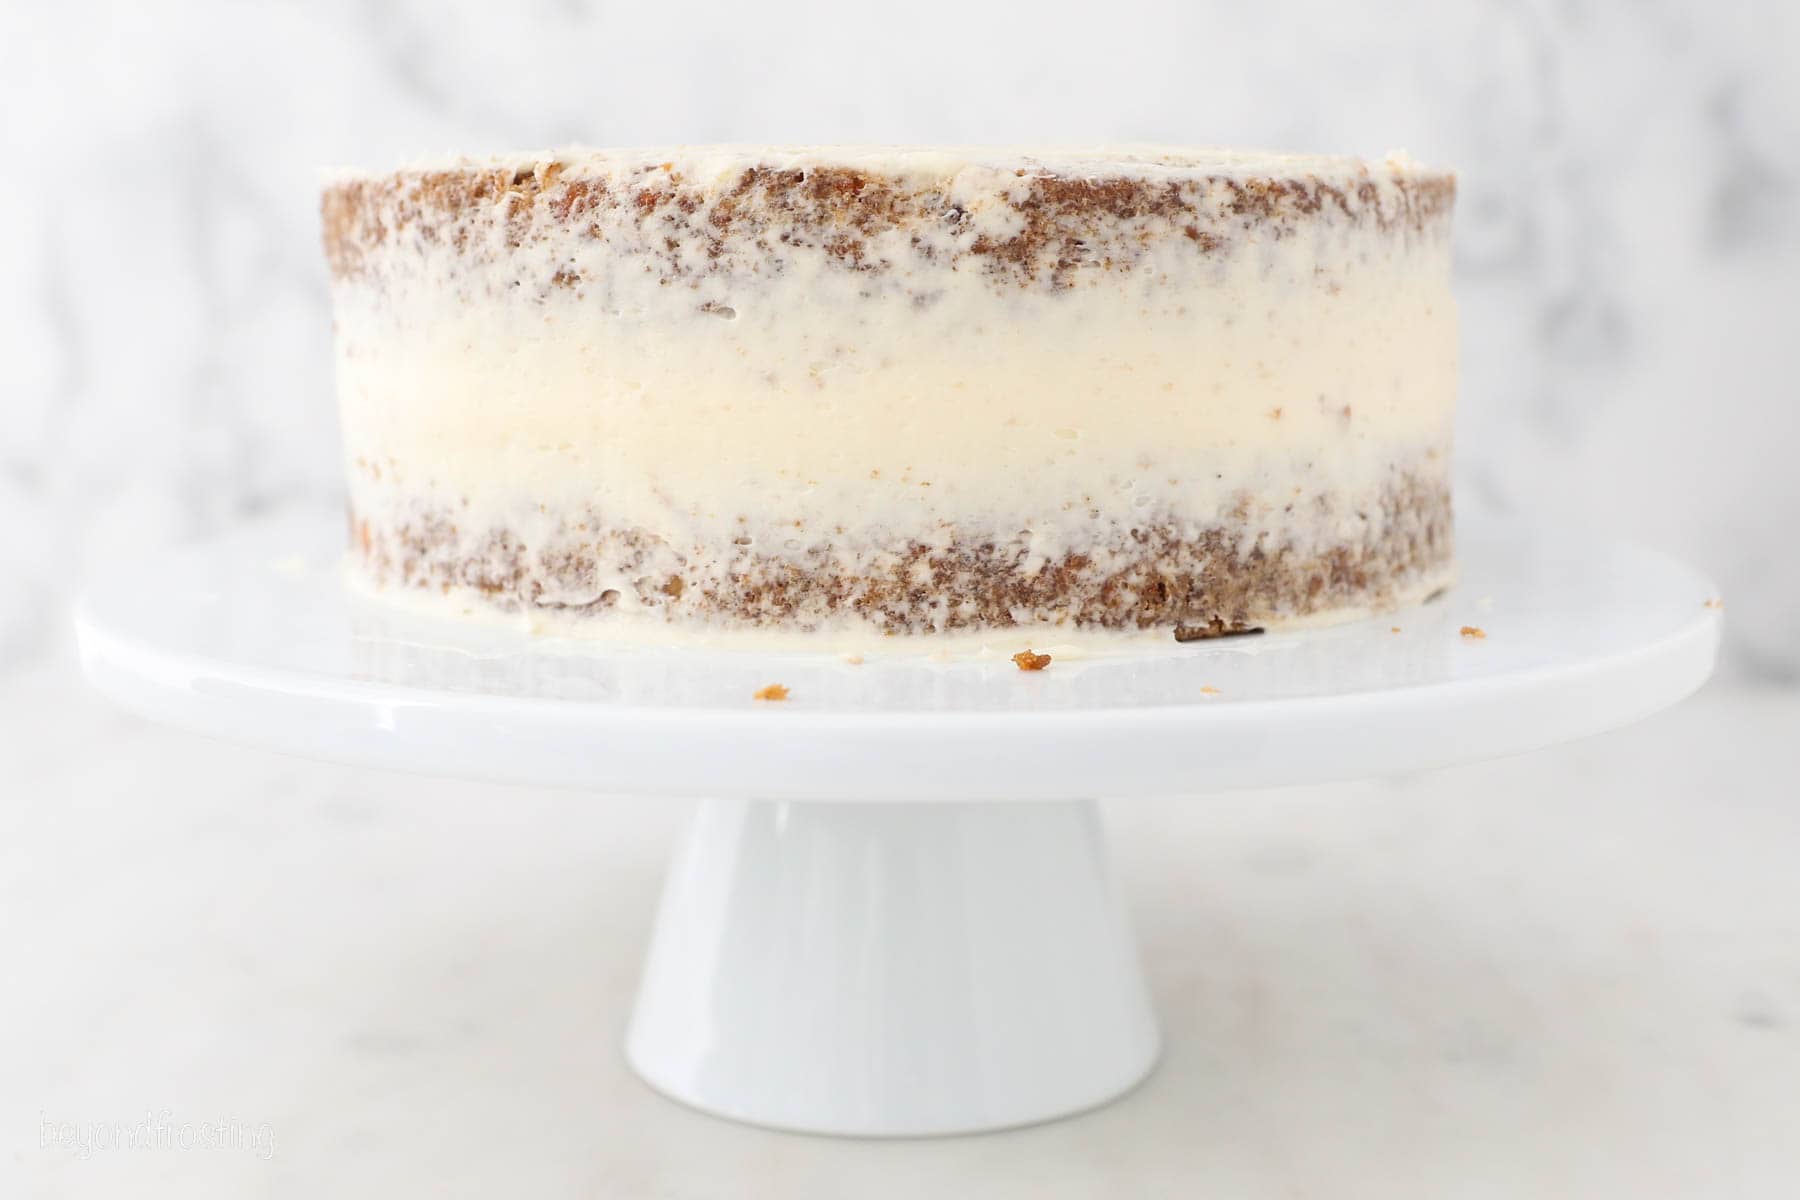 Assembled sweet potato cake with a frosting crumb coat on a white cake stand.